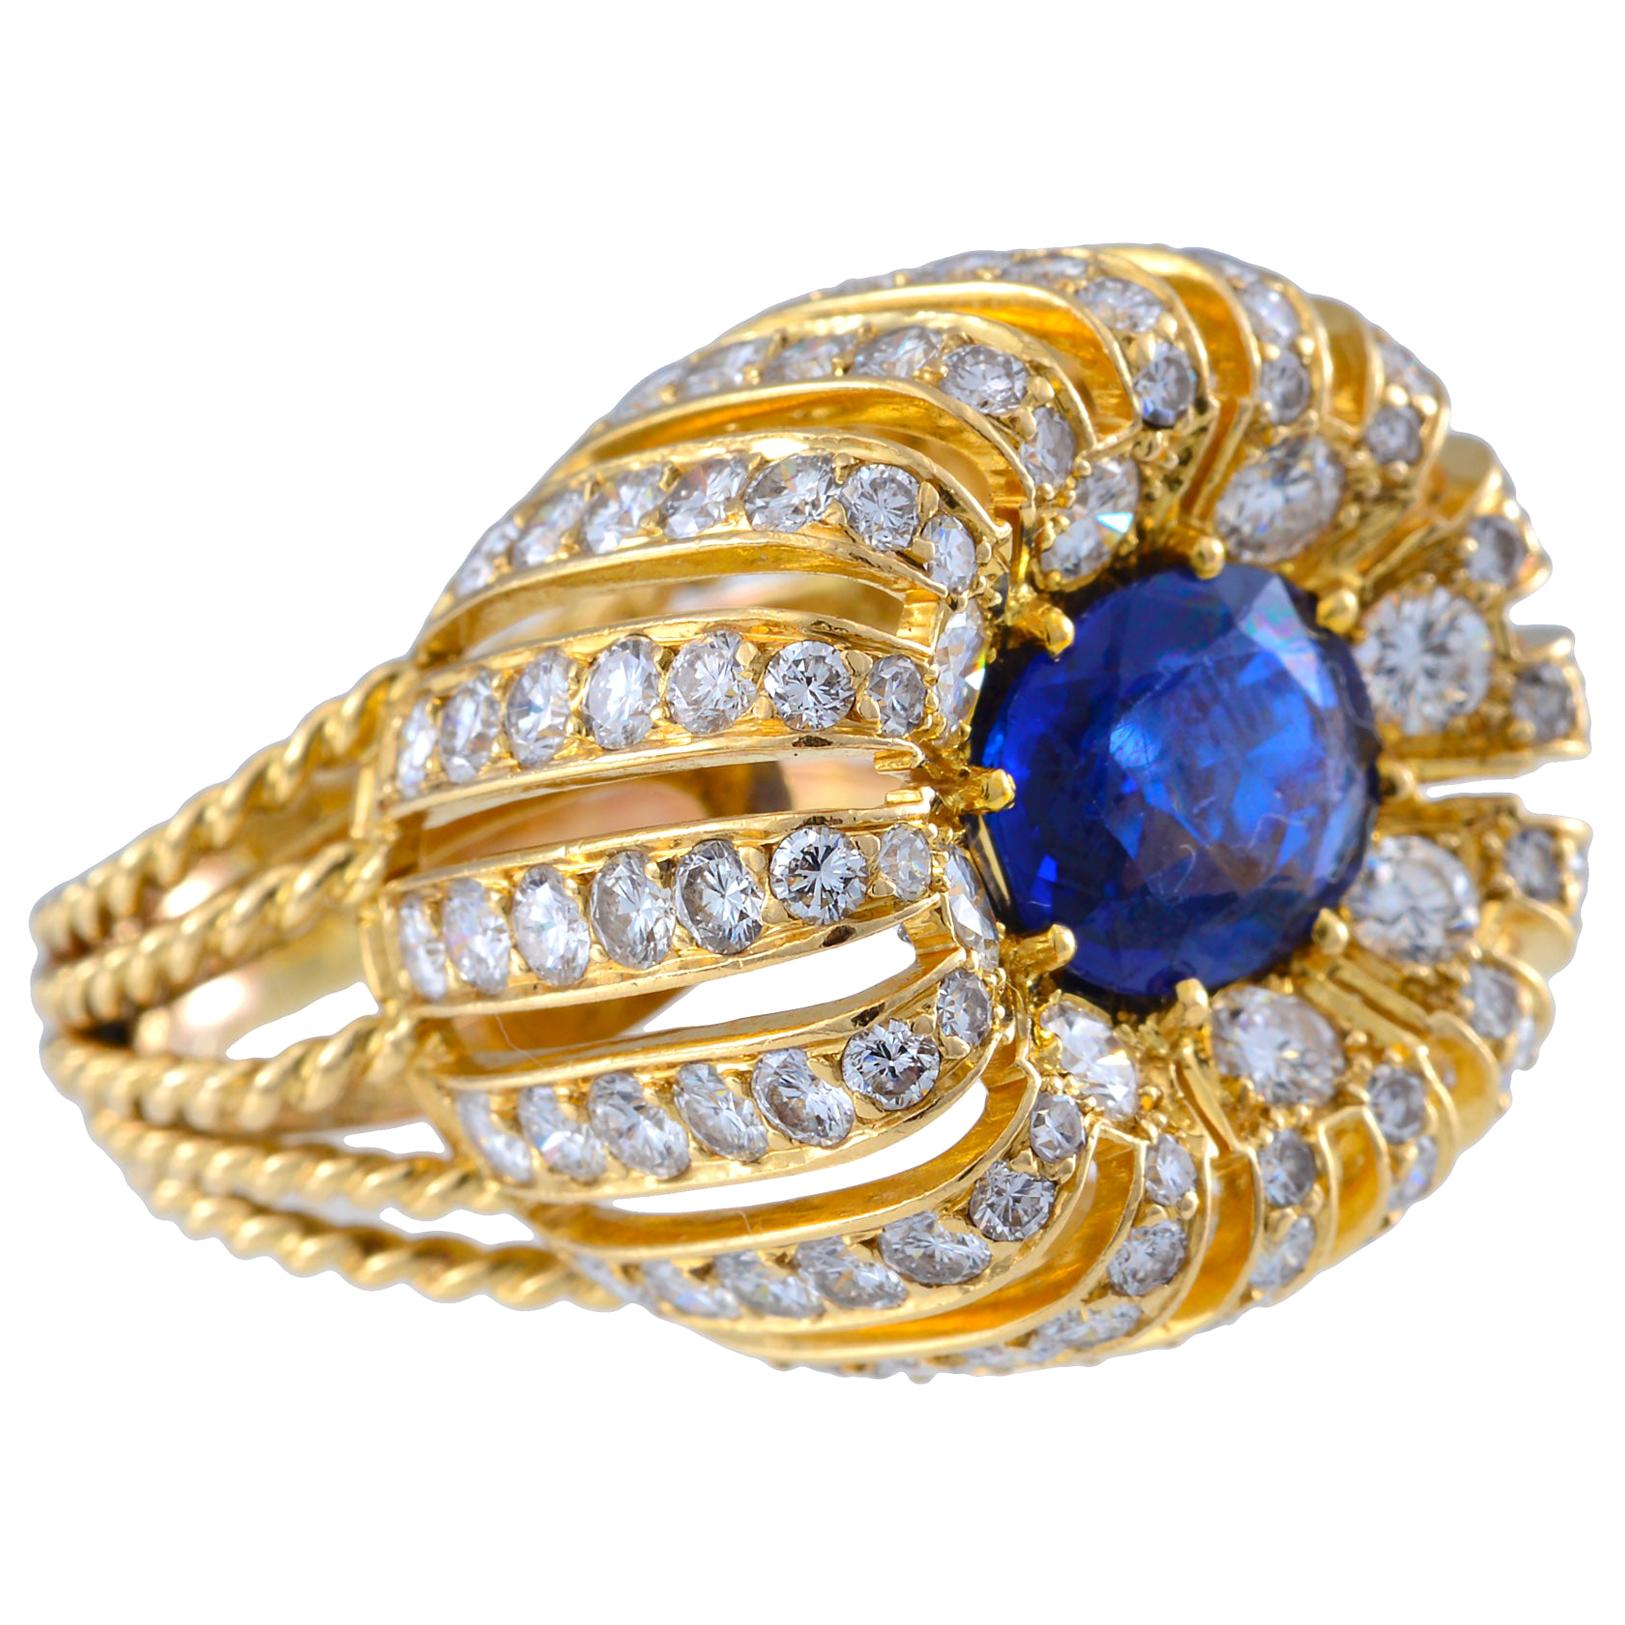 Early 1950s Yellow Gold, Diamond and Sapphire Ring For Sale